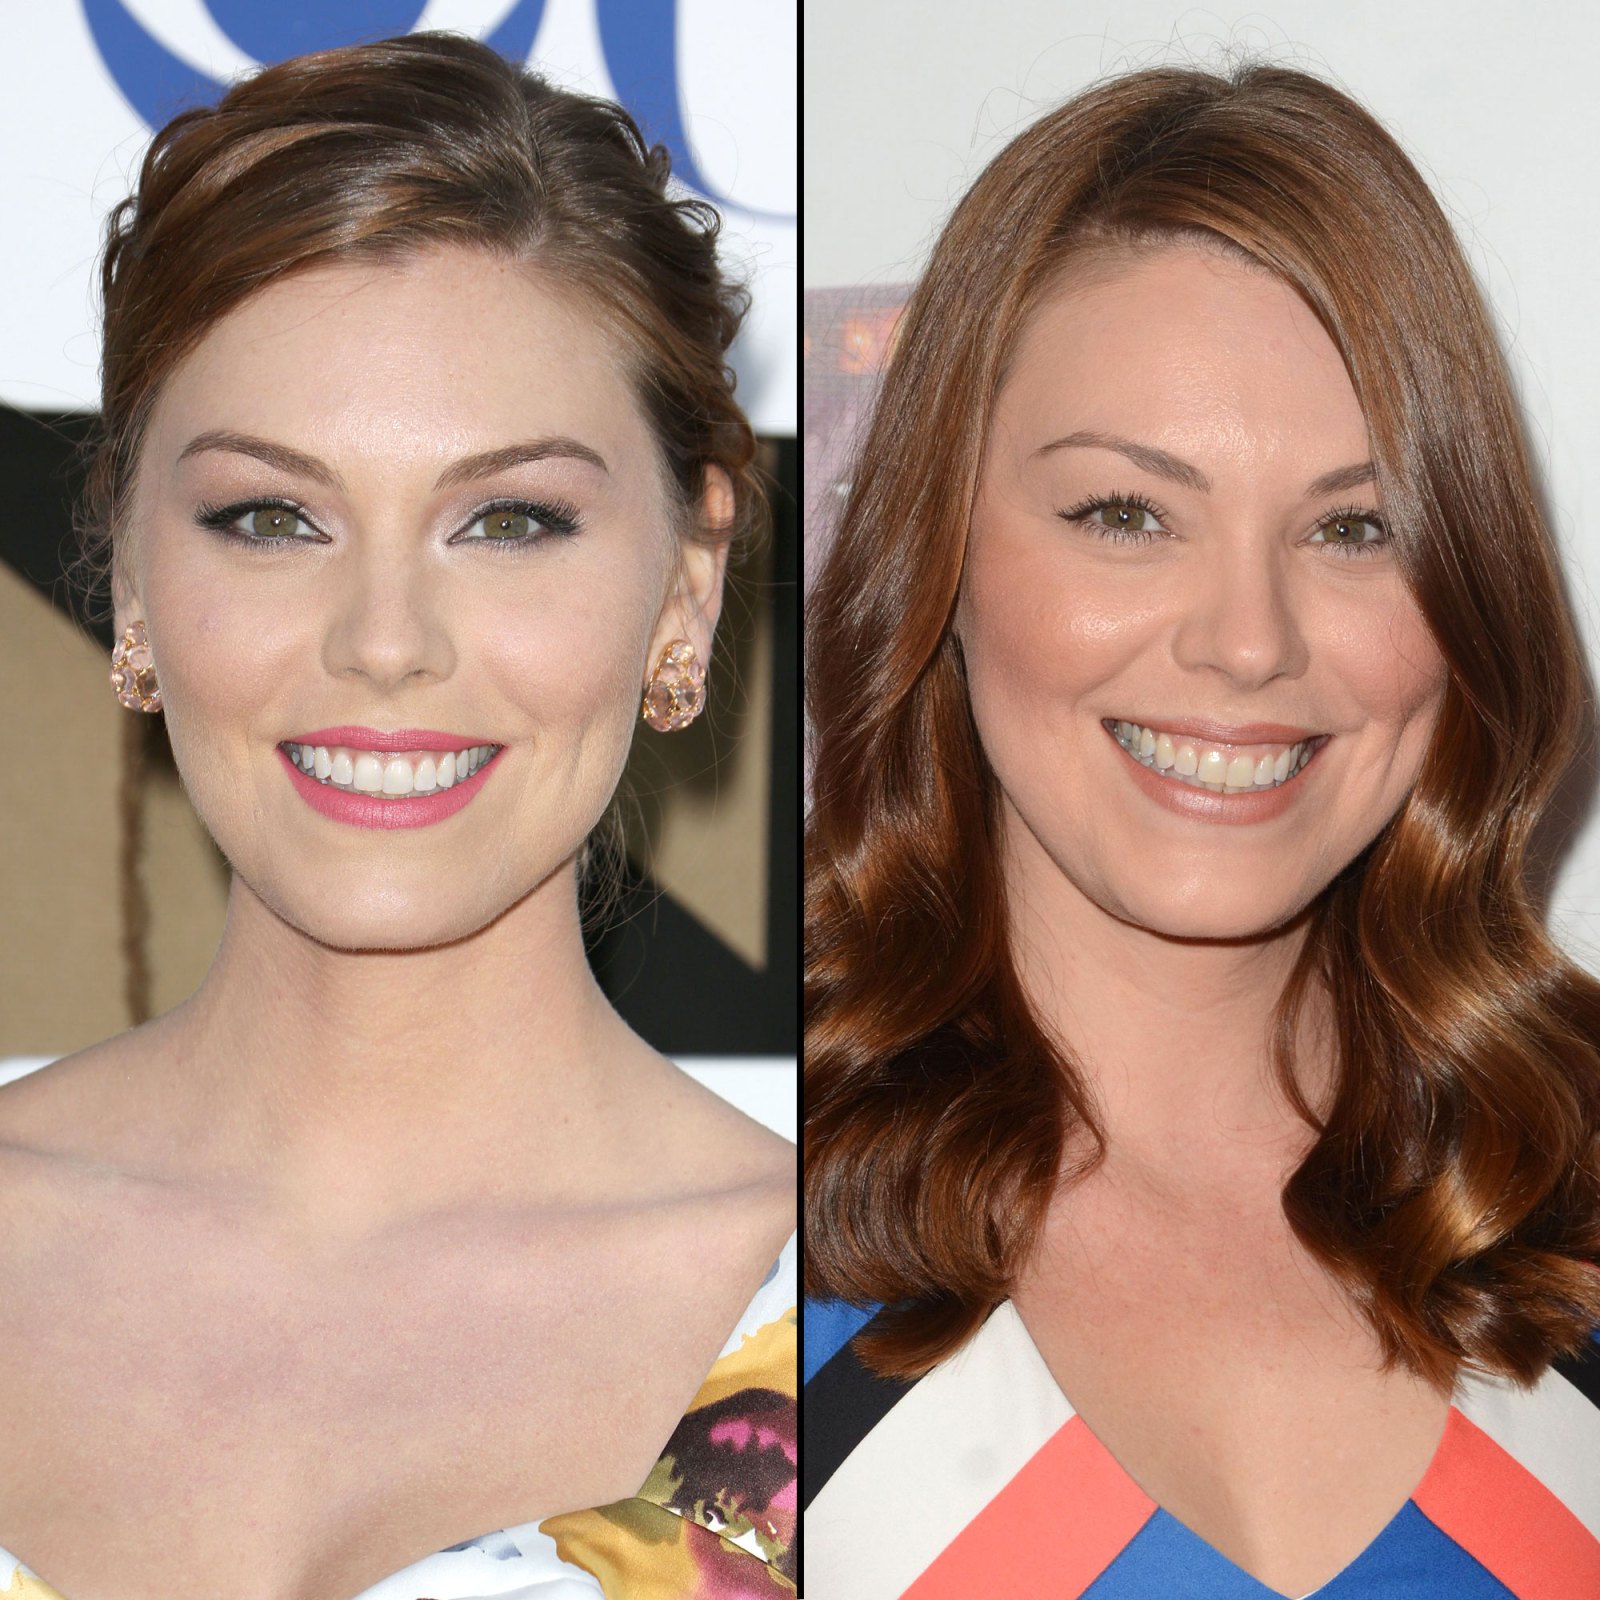 Kaitlyn Black Hart Of Dixie Cast Where Are They Now ?w=1600&quality=86&strip=all